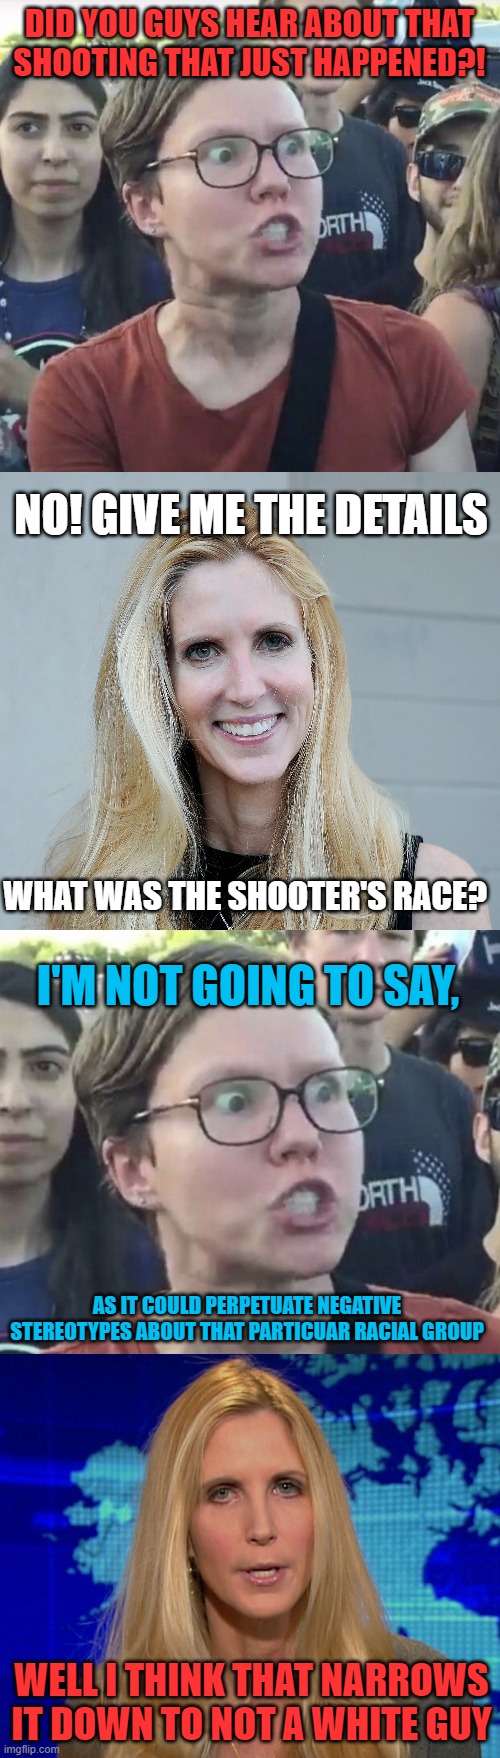 Coulter's Law | DID YOU GUYS HEAR ABOUT THAT SHOOTING THAT JUST HAPPENED?! NO! GIVE ME THE DETAILS; WHAT WAS THE SHOOTER'S RACE? I'M NOT GOING TO SAY, AS IT COULD PERPETUATE NEGATIVE STEREOTYPES ABOUT THAT PARTICUAR RACIAL GROUP; WELL I THINK THAT NARROWS IT DOWN TO NOT A WHITE GUY | image tagged in memes,leftist,media,shooter,race,white guy | made w/ Imgflip meme maker